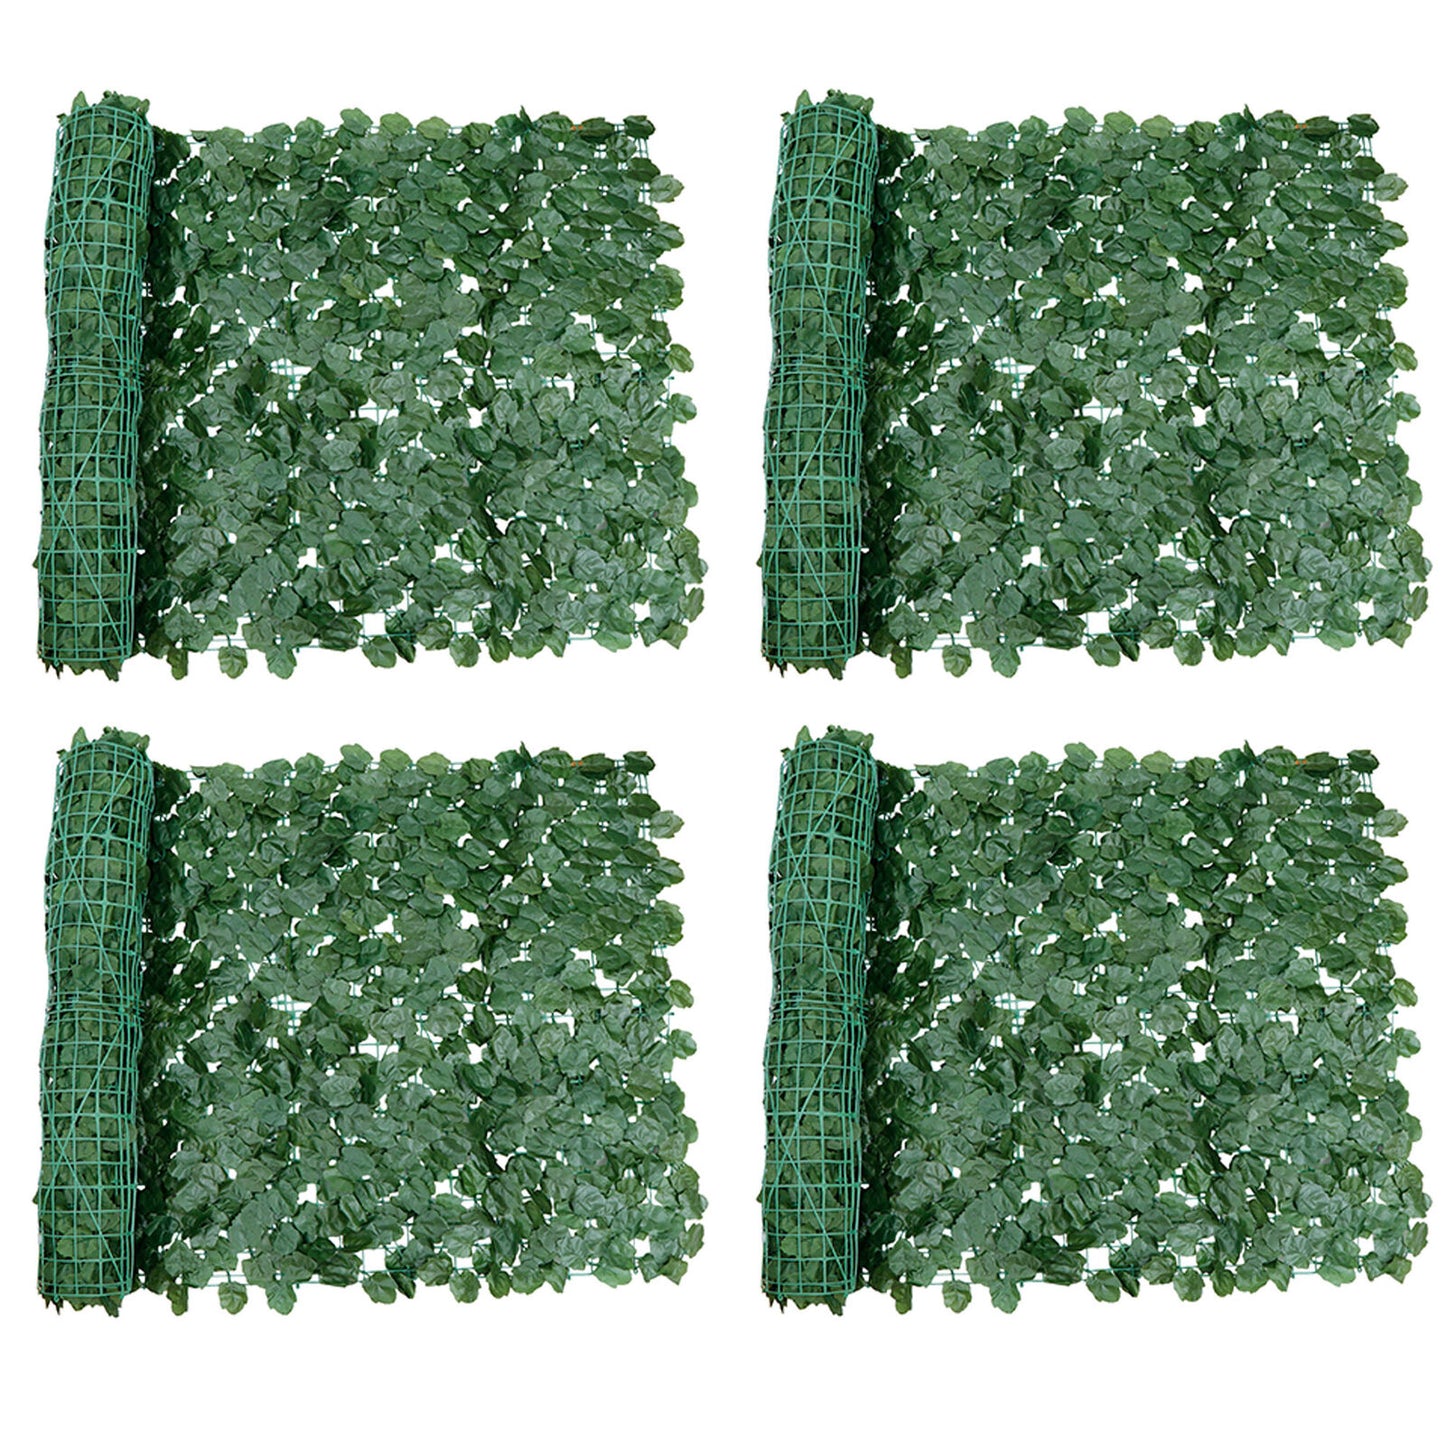 Privacy Fence Screen Artificial 98"X39" Faux Ivy Hedge Fencing Outdoor Decor X4